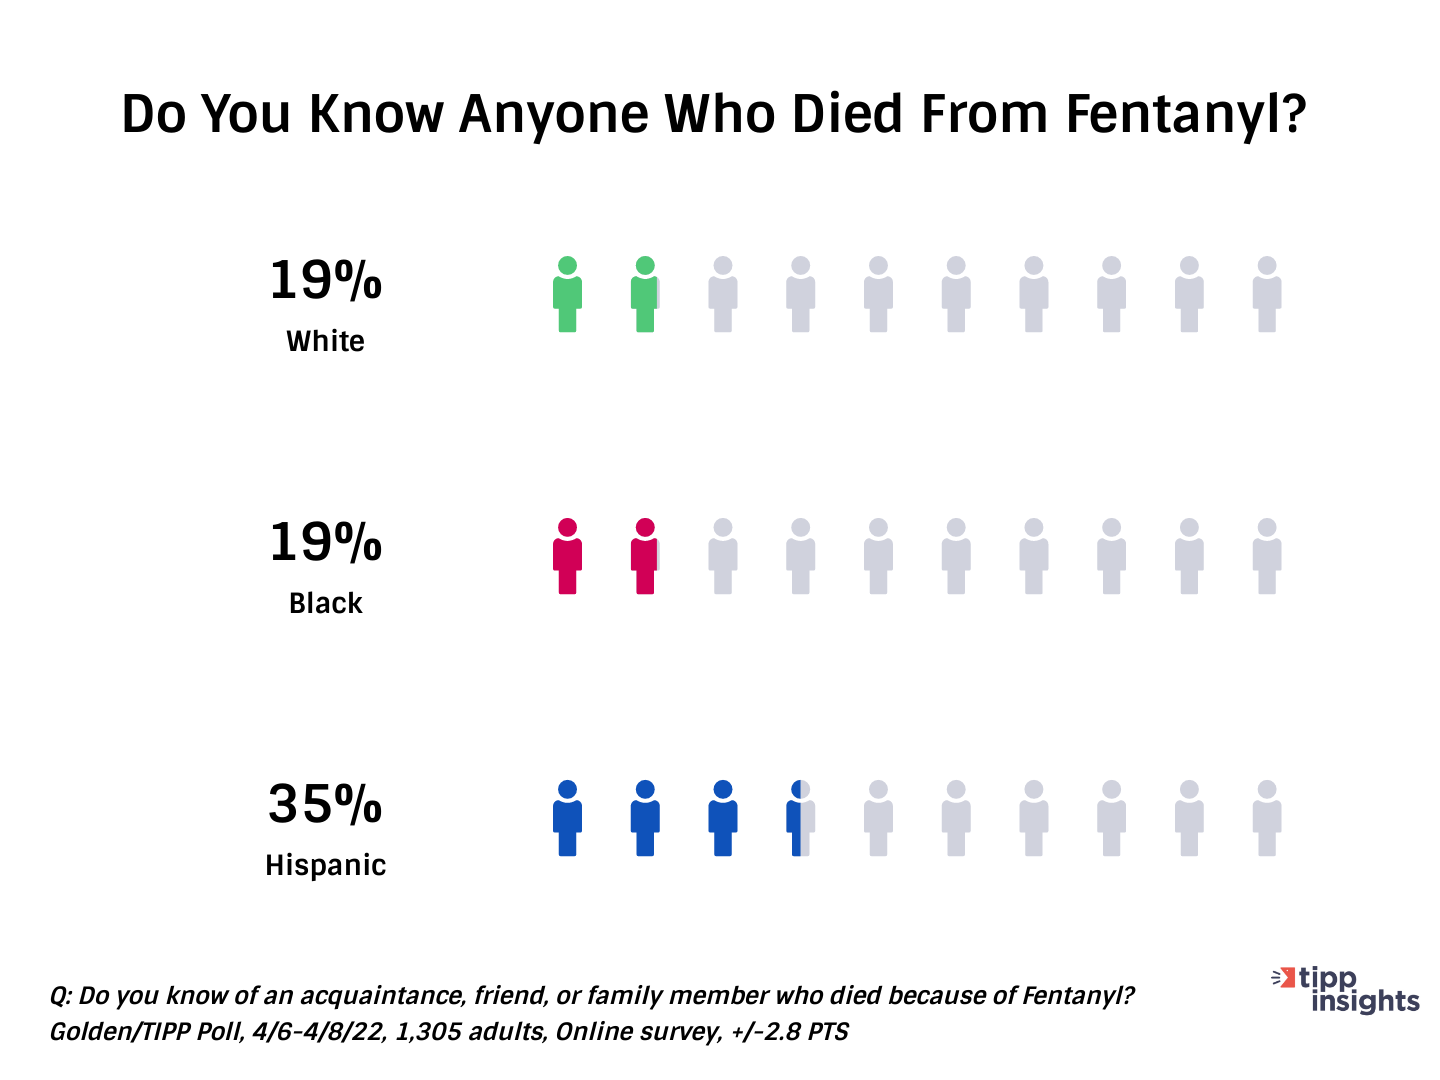 Golden/TIPP Poll: Do Americans know anyone who has died from Fentanyl, broken down by ethnicity